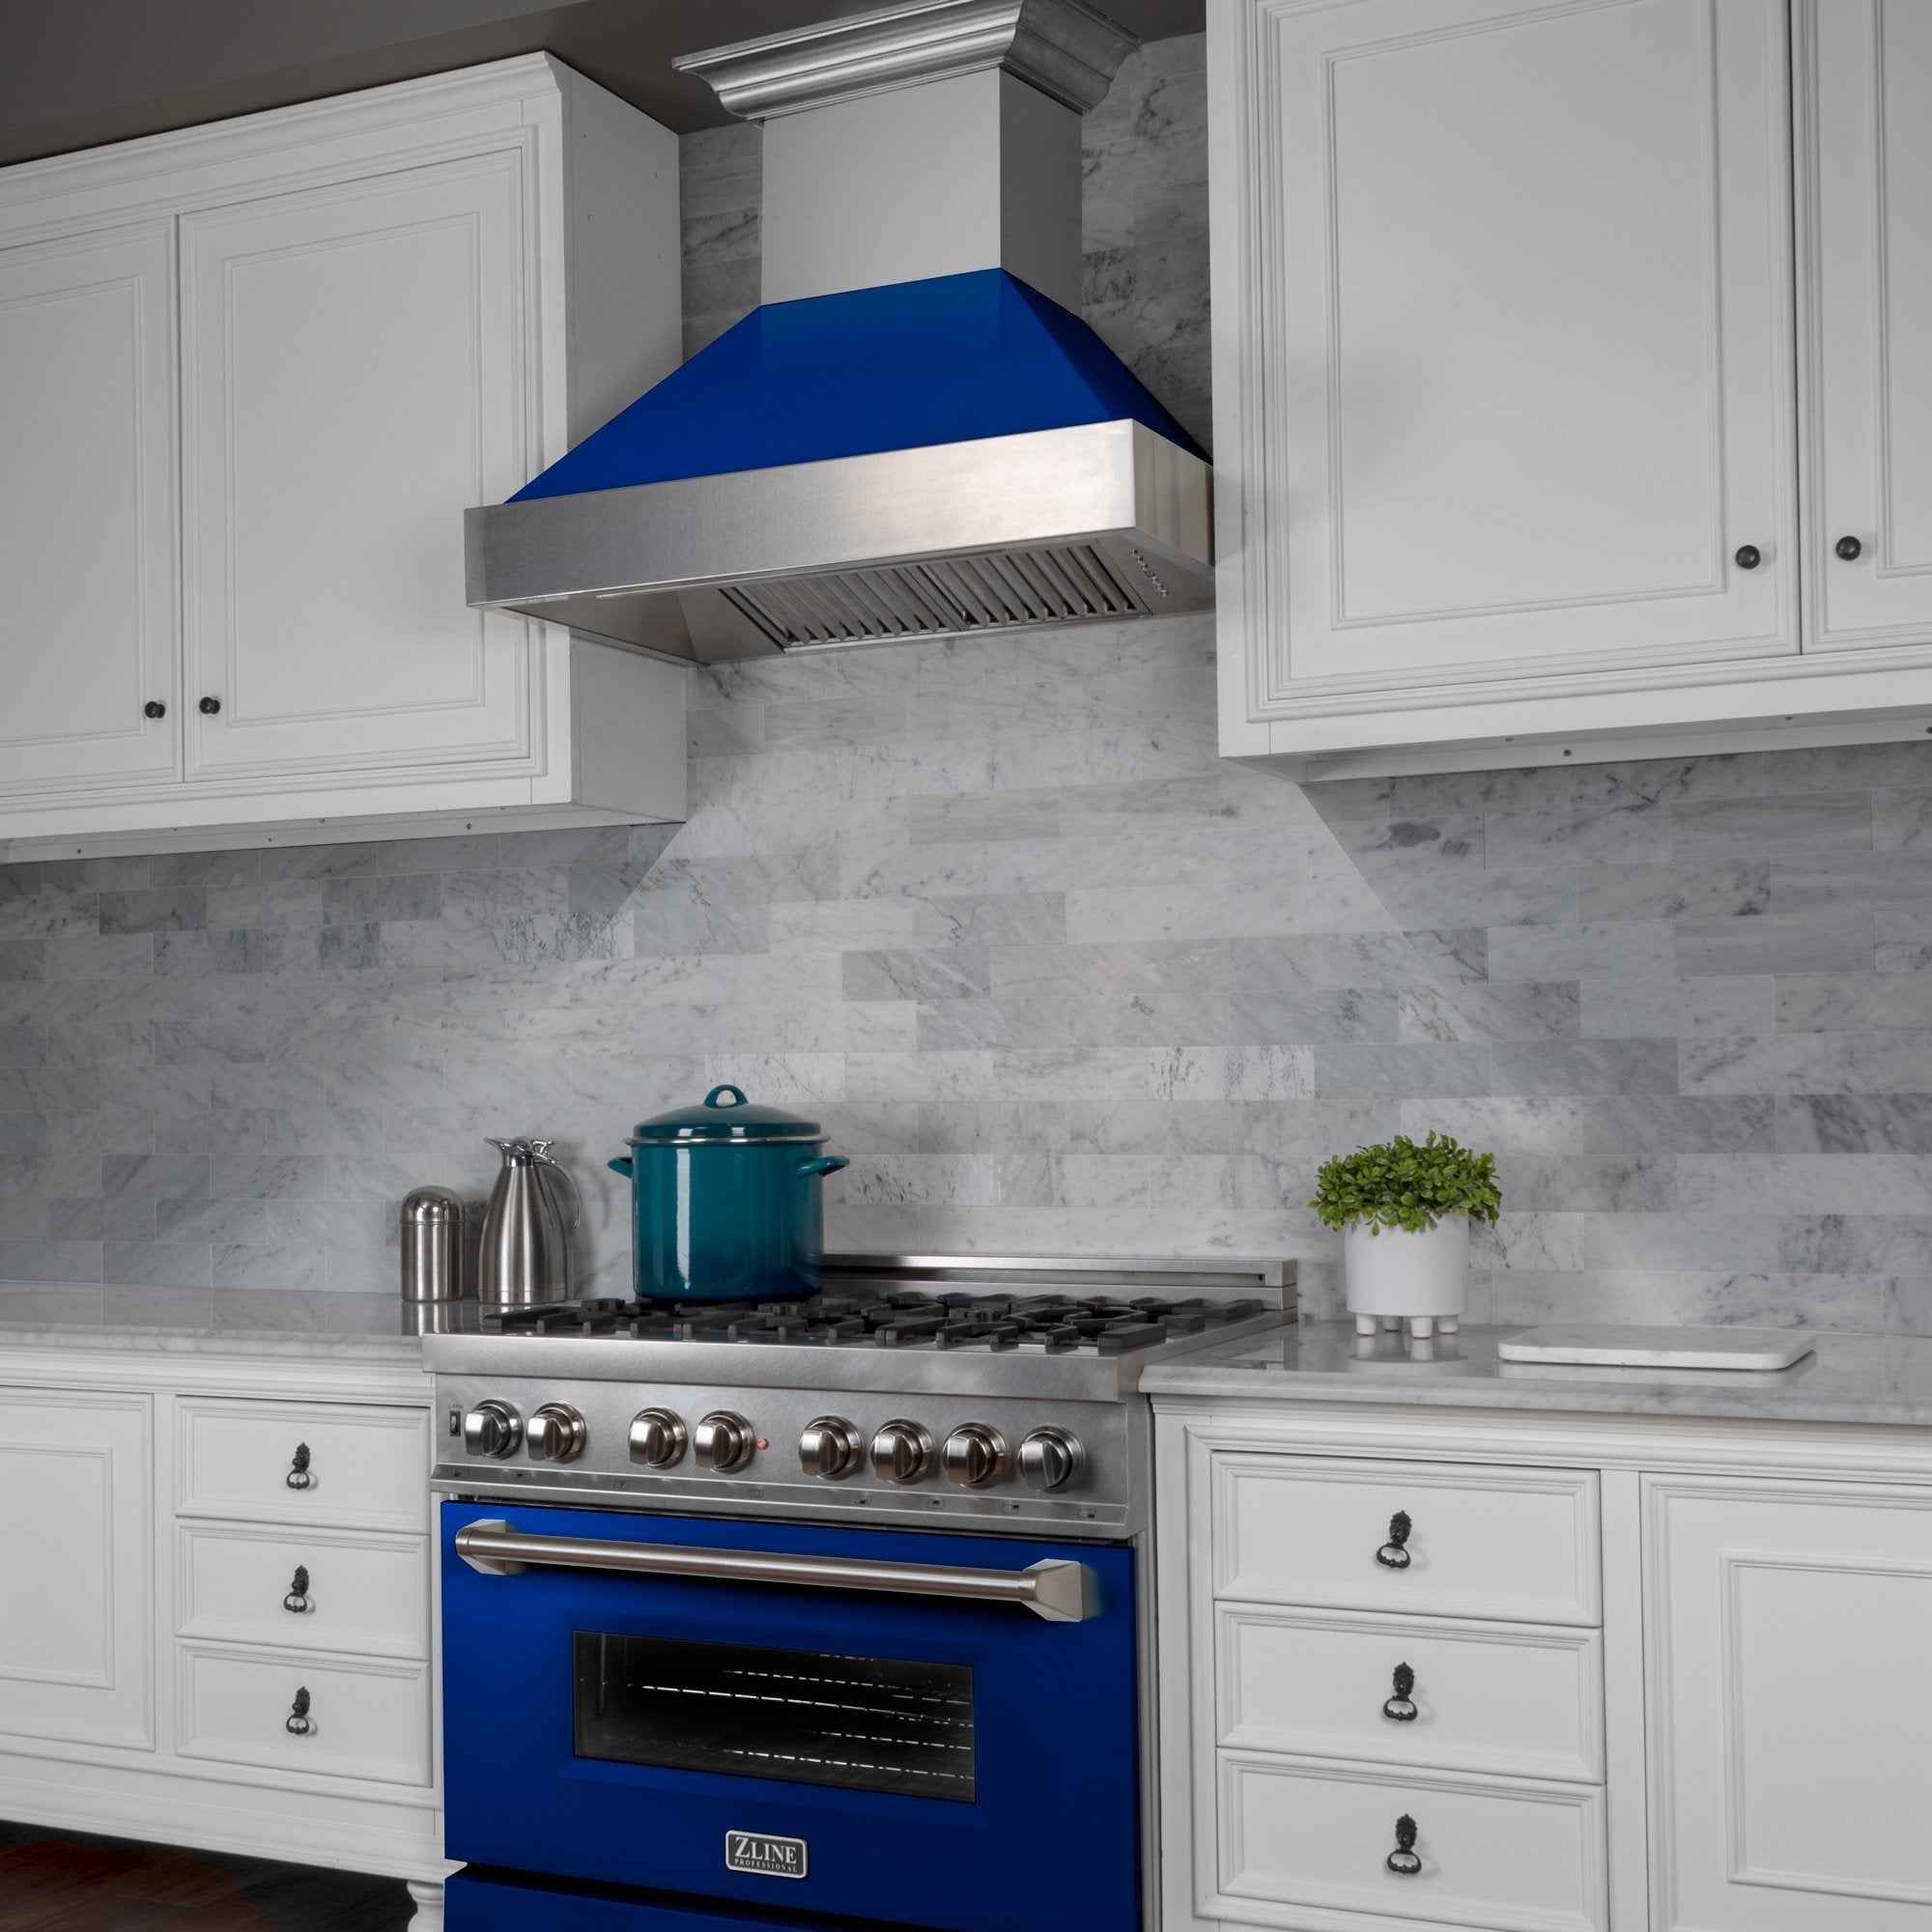 ZLINE Ducted Fingerprint Resistant Stainless Steel Range Hood with Blue Gloss Shell (8654BG) with short chimney in a kitchen with matching blue gloss range from side.